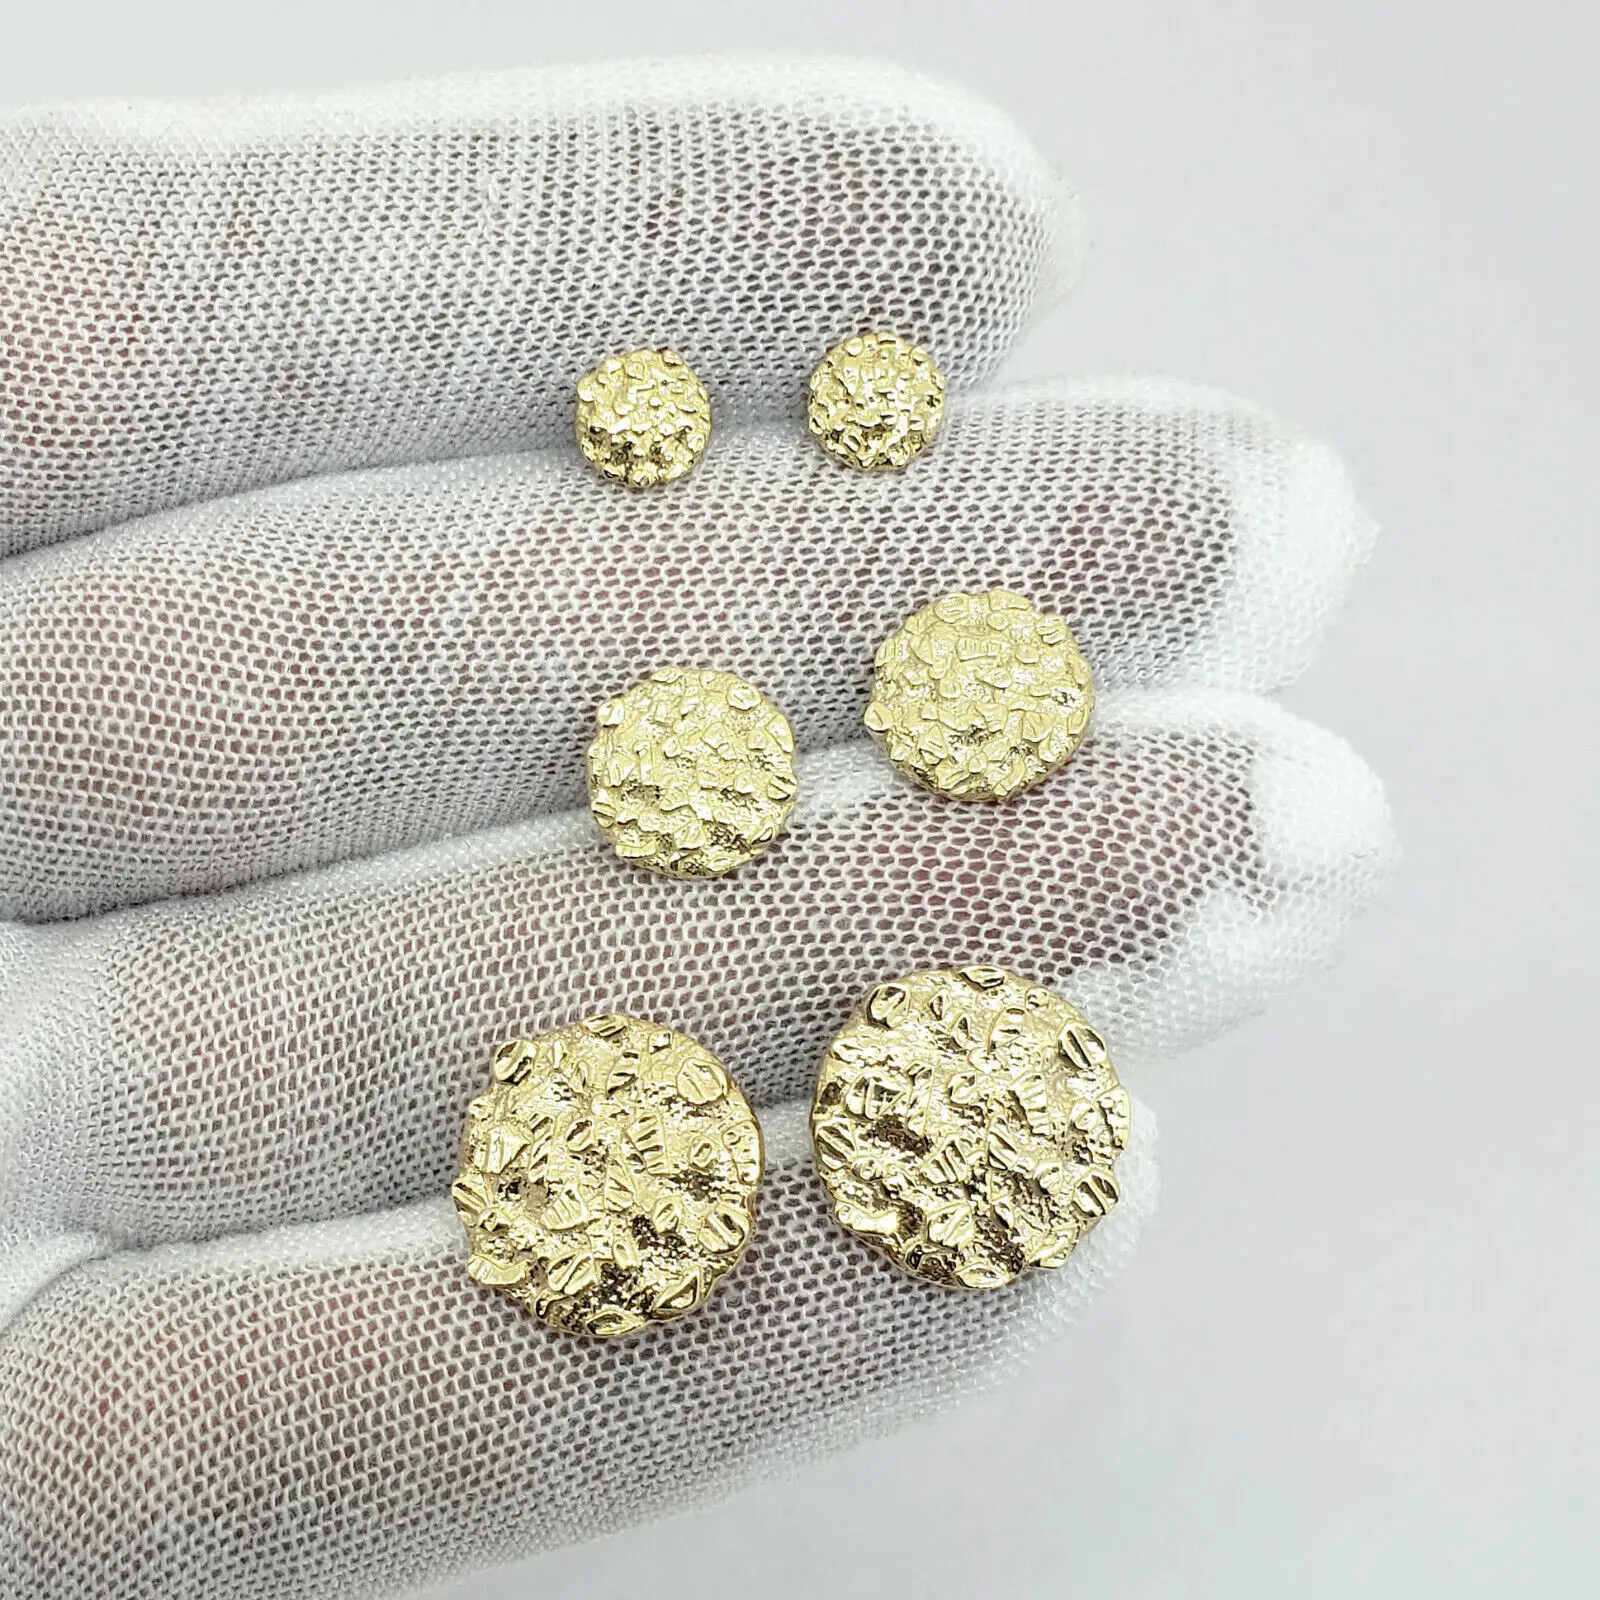 Solid 14K Yellow Gold Round Nugget Earrings, All Sizes (Small, Medium ...